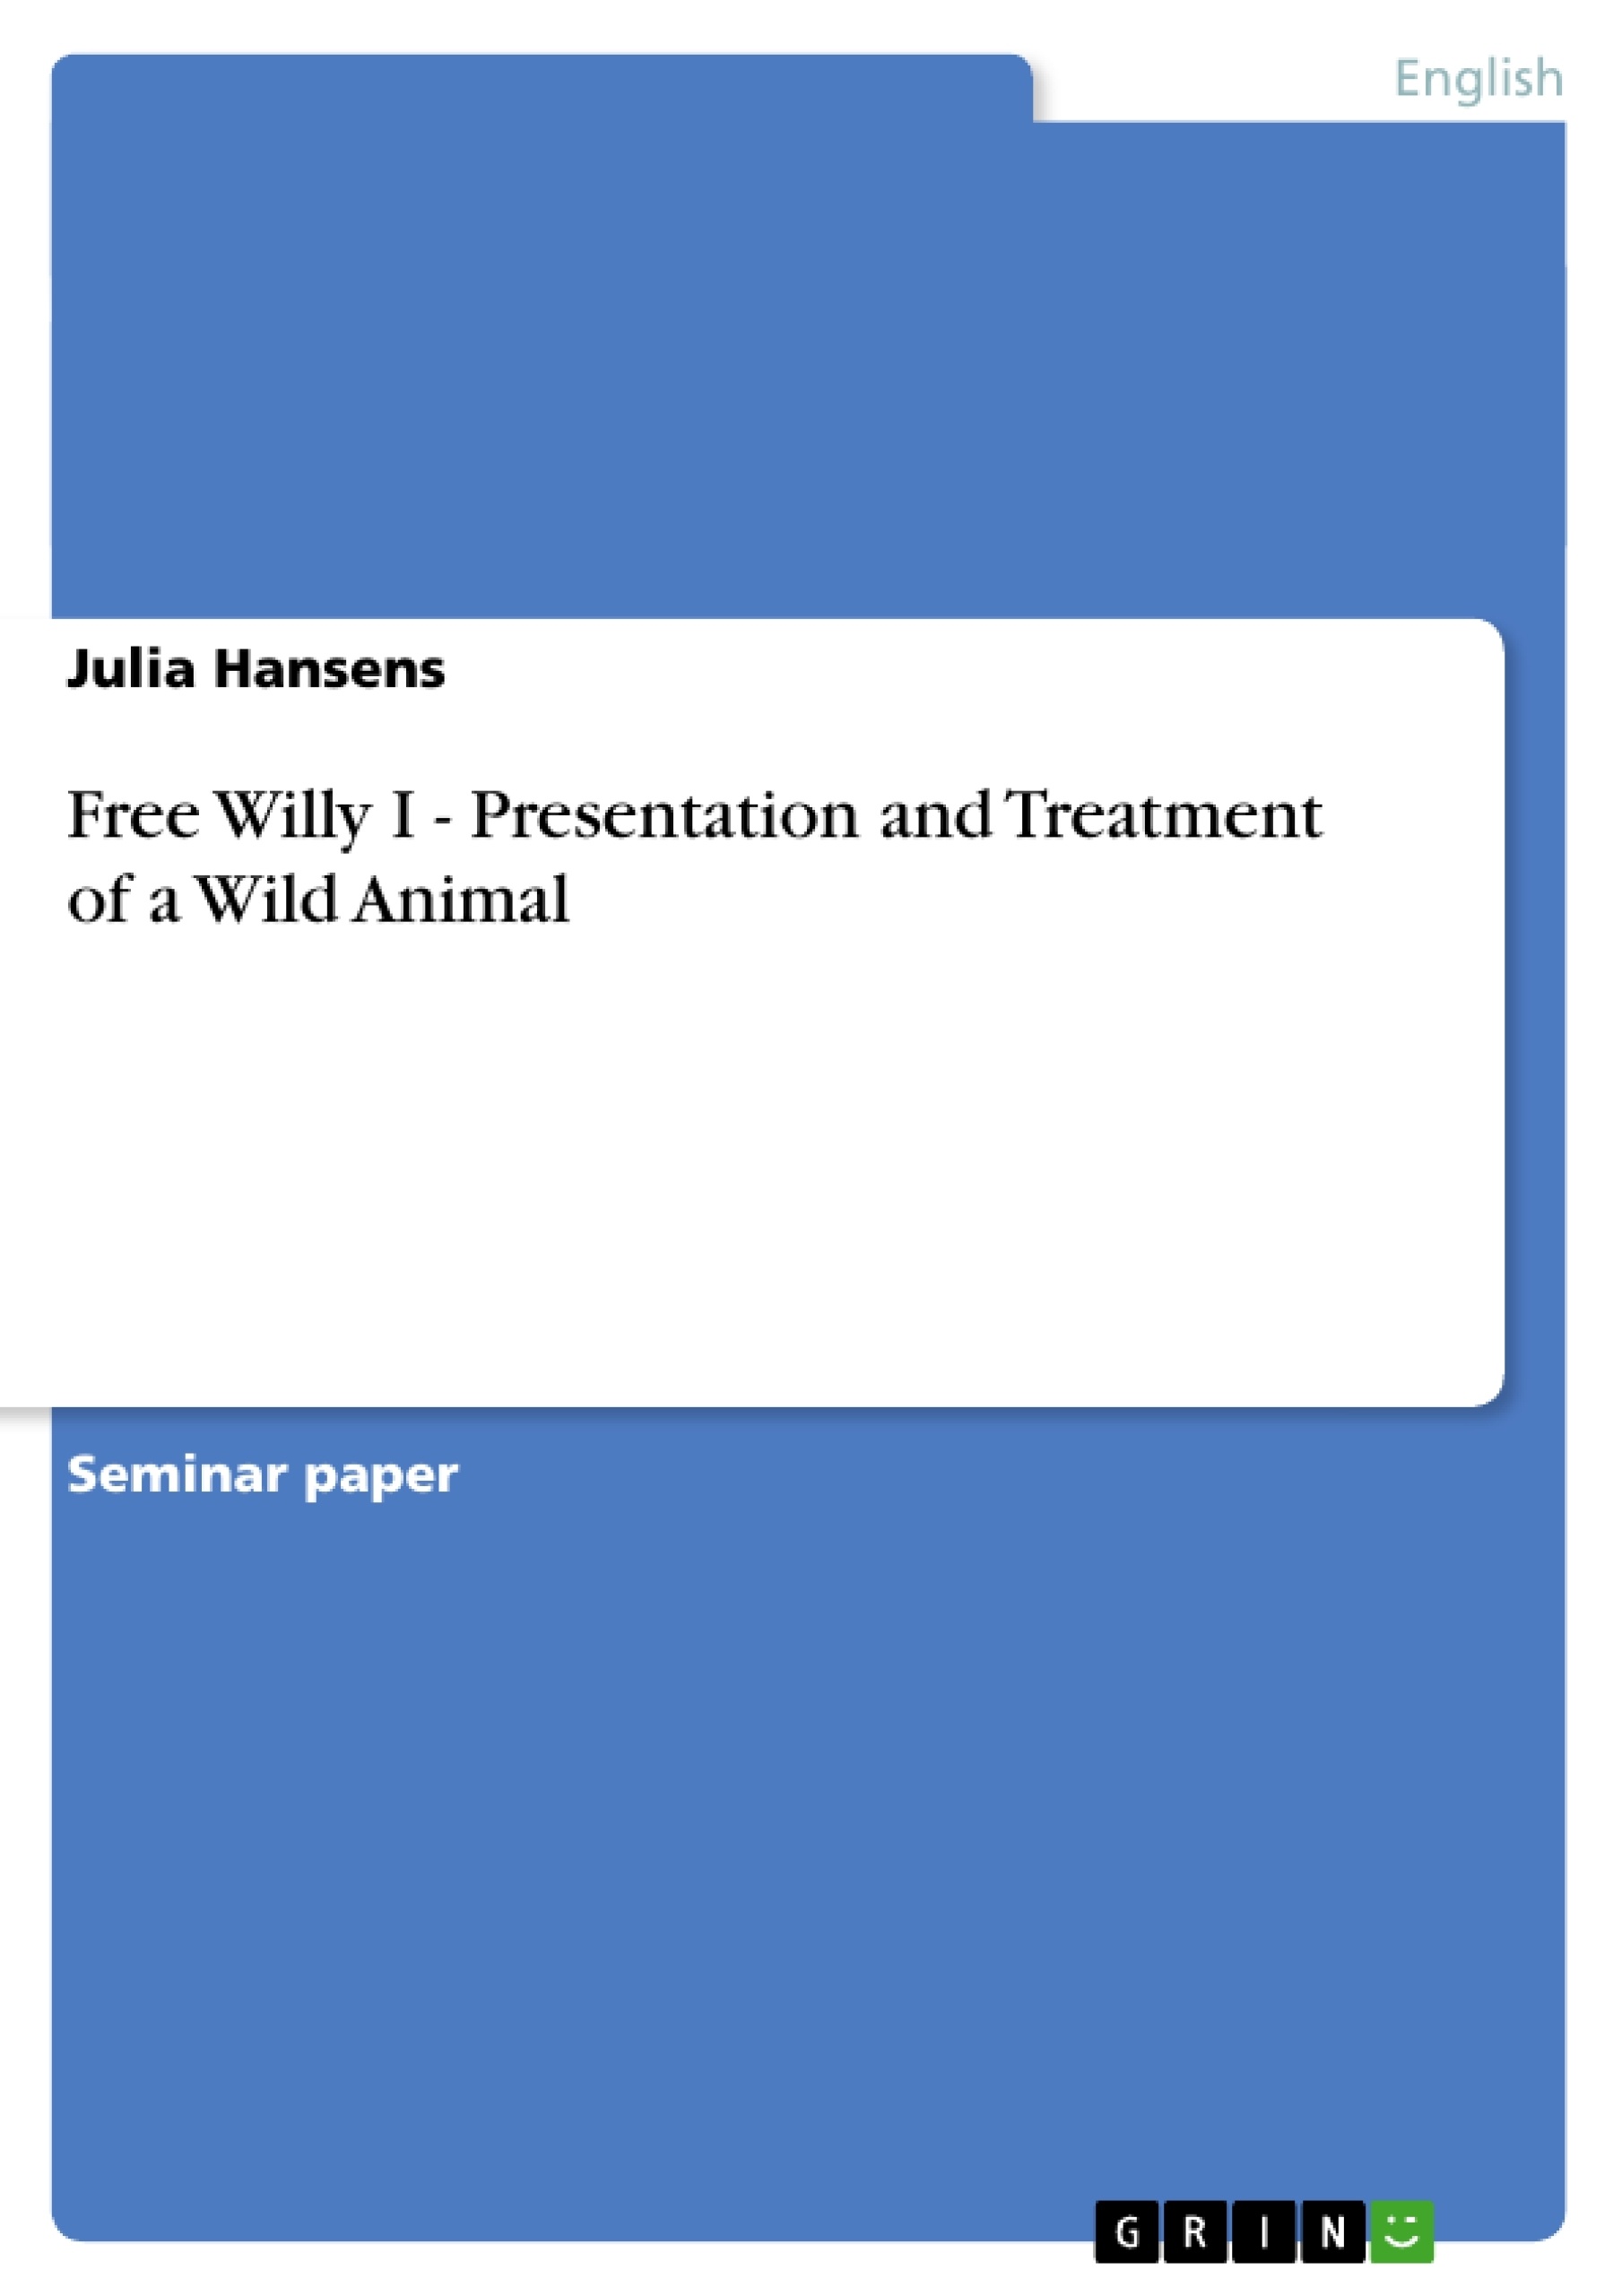 Título: Free Willy I - Presentation and Treatment of a Wild Animal